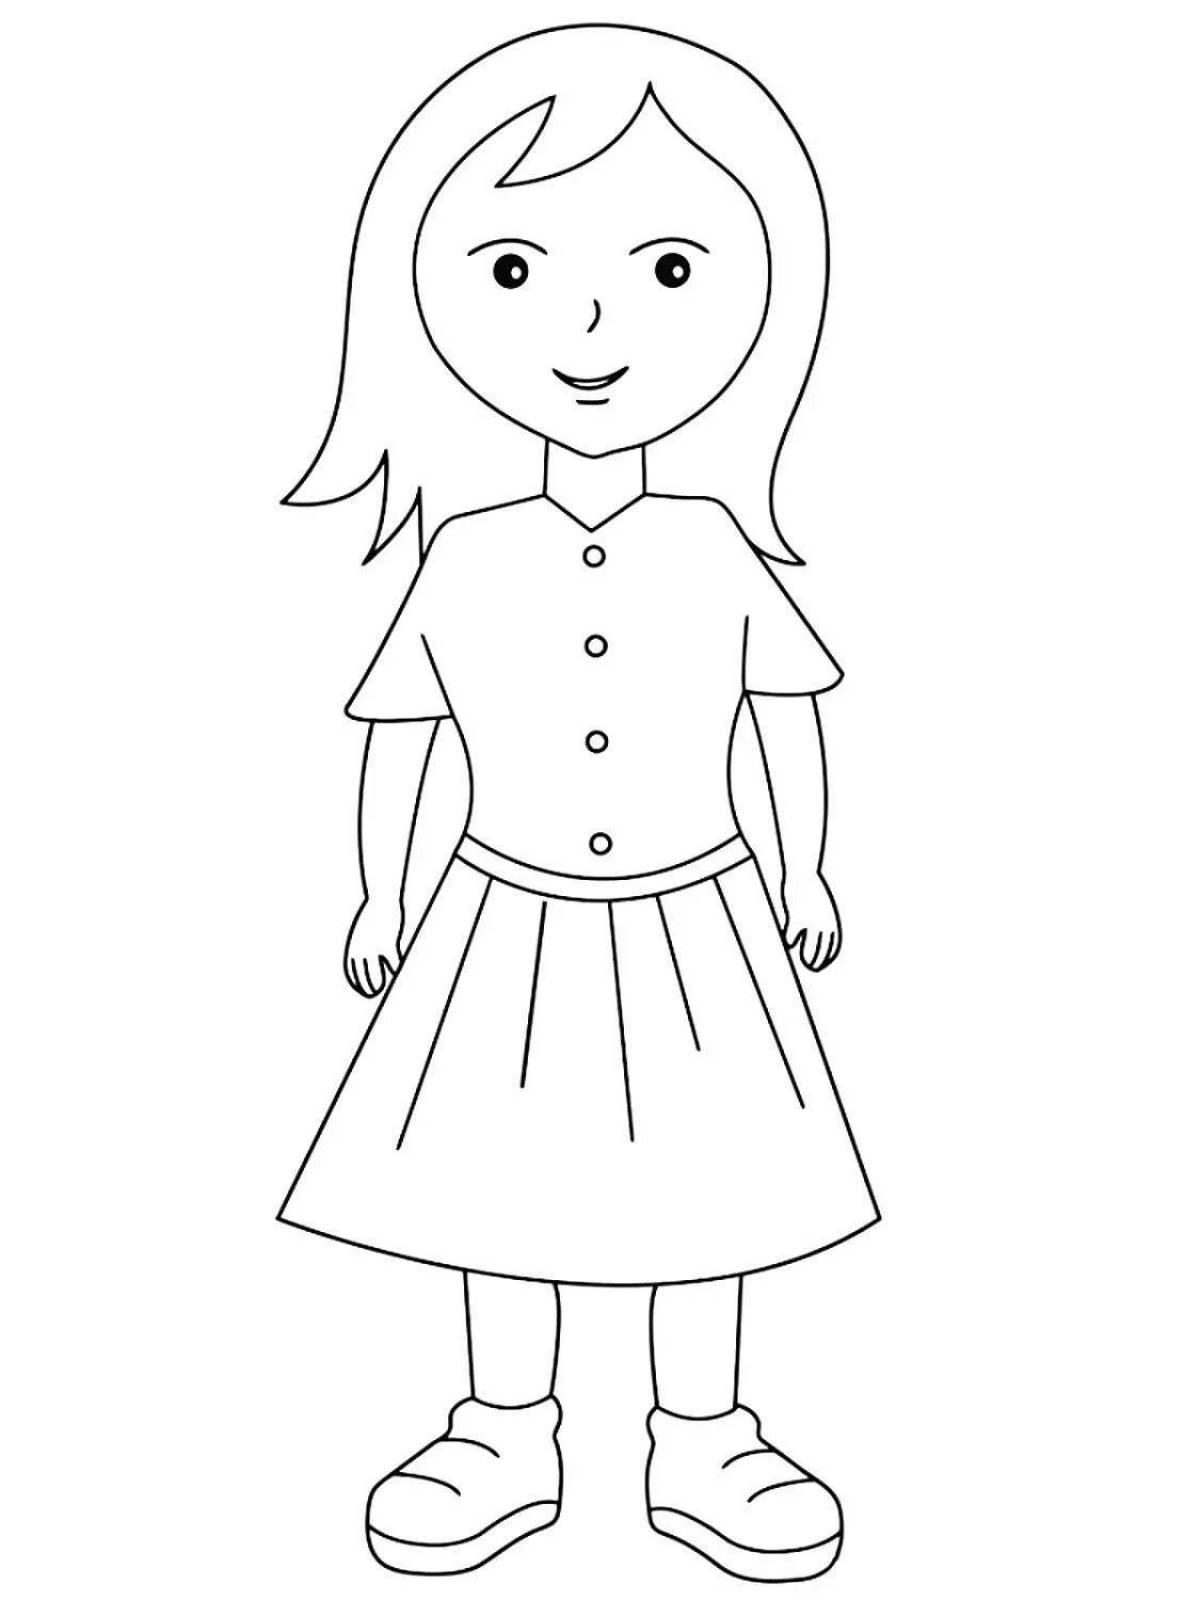 Color-frenzy kuyrshak coloring page